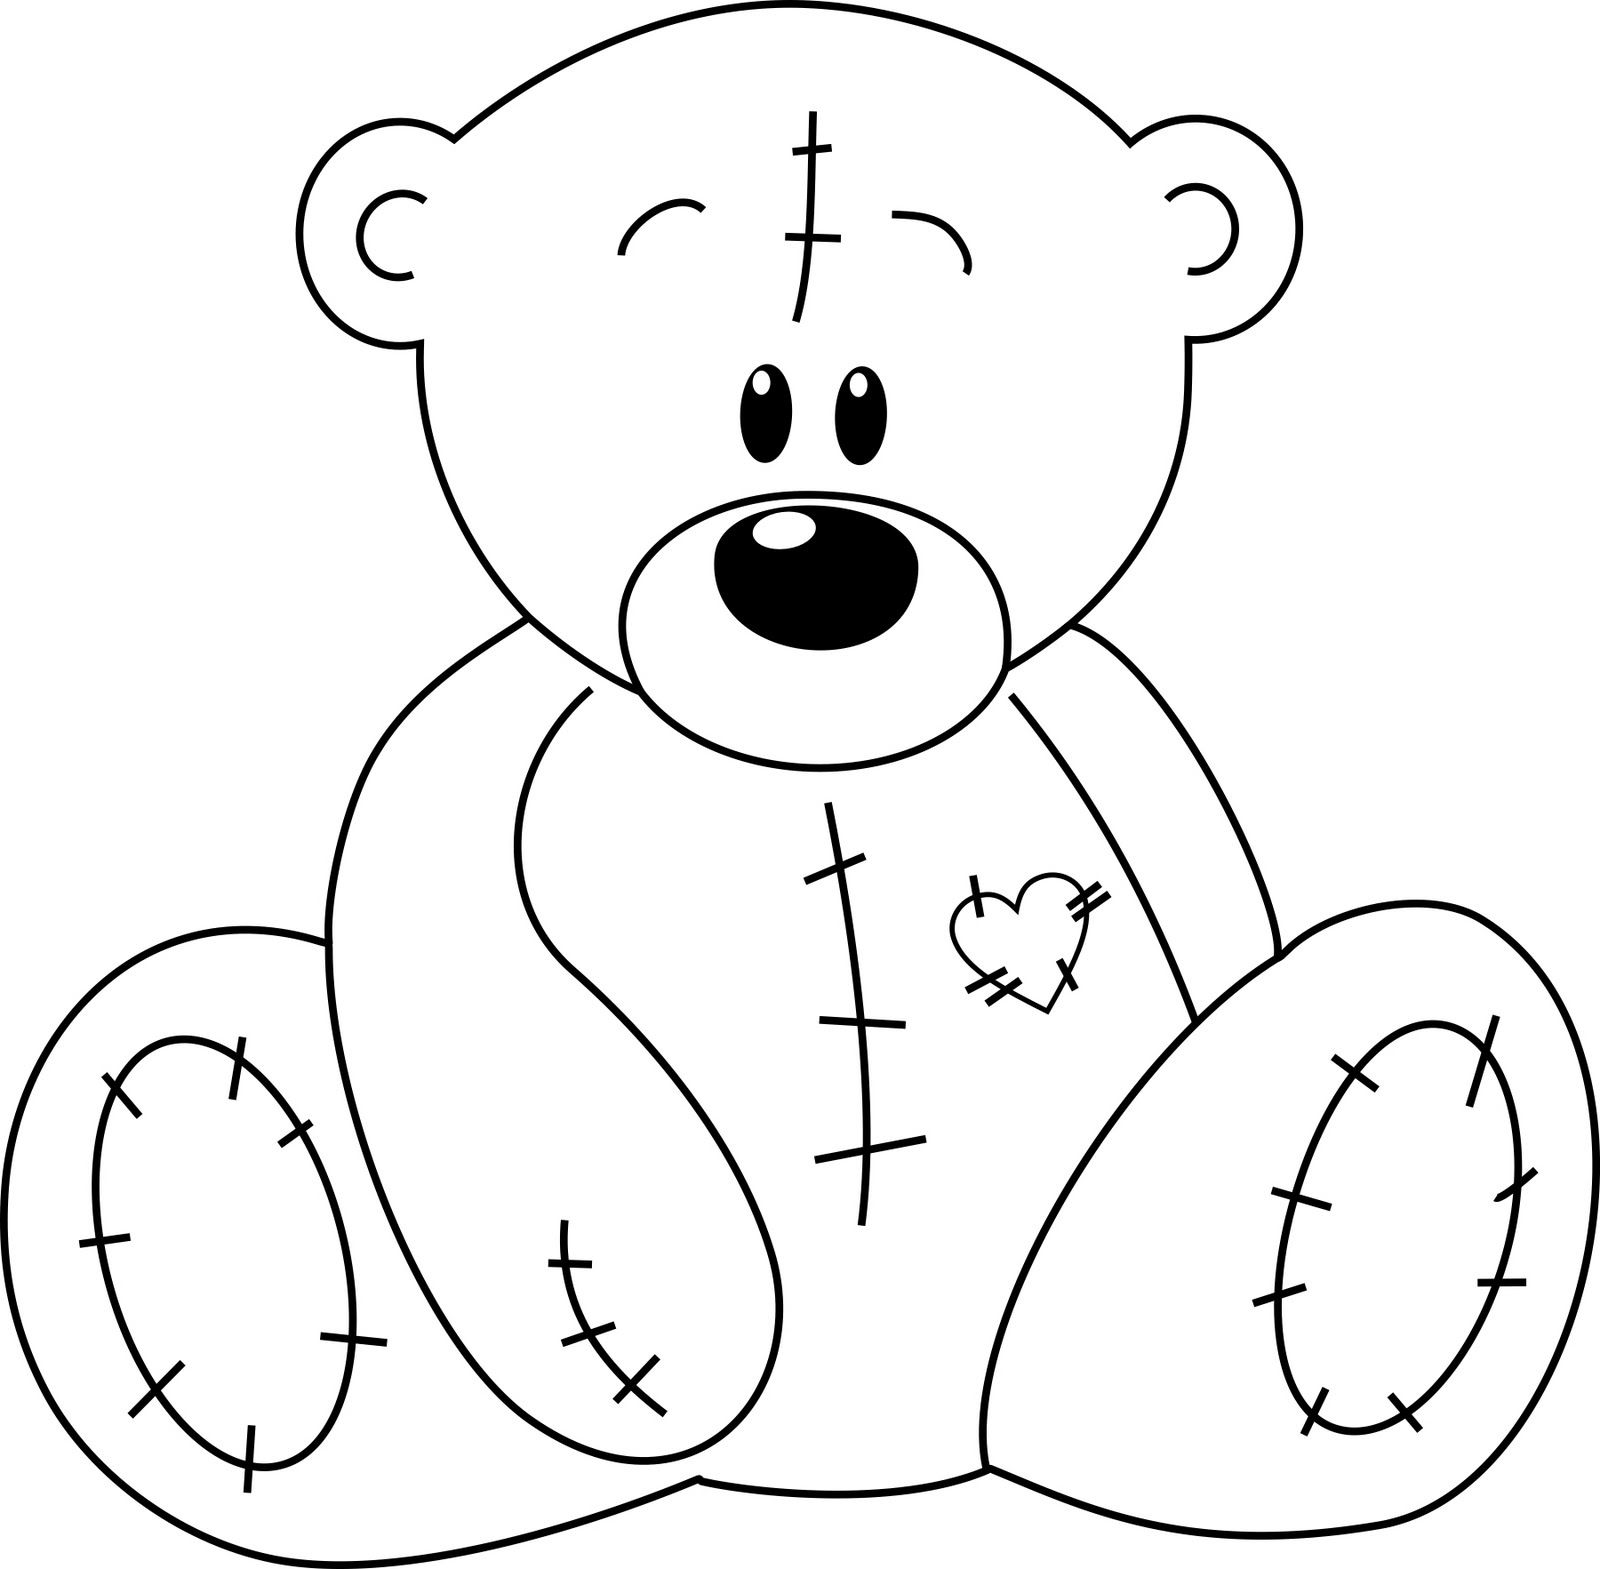 Teddy Bear With Heart Coloring Pages at GetColorings.com | Free